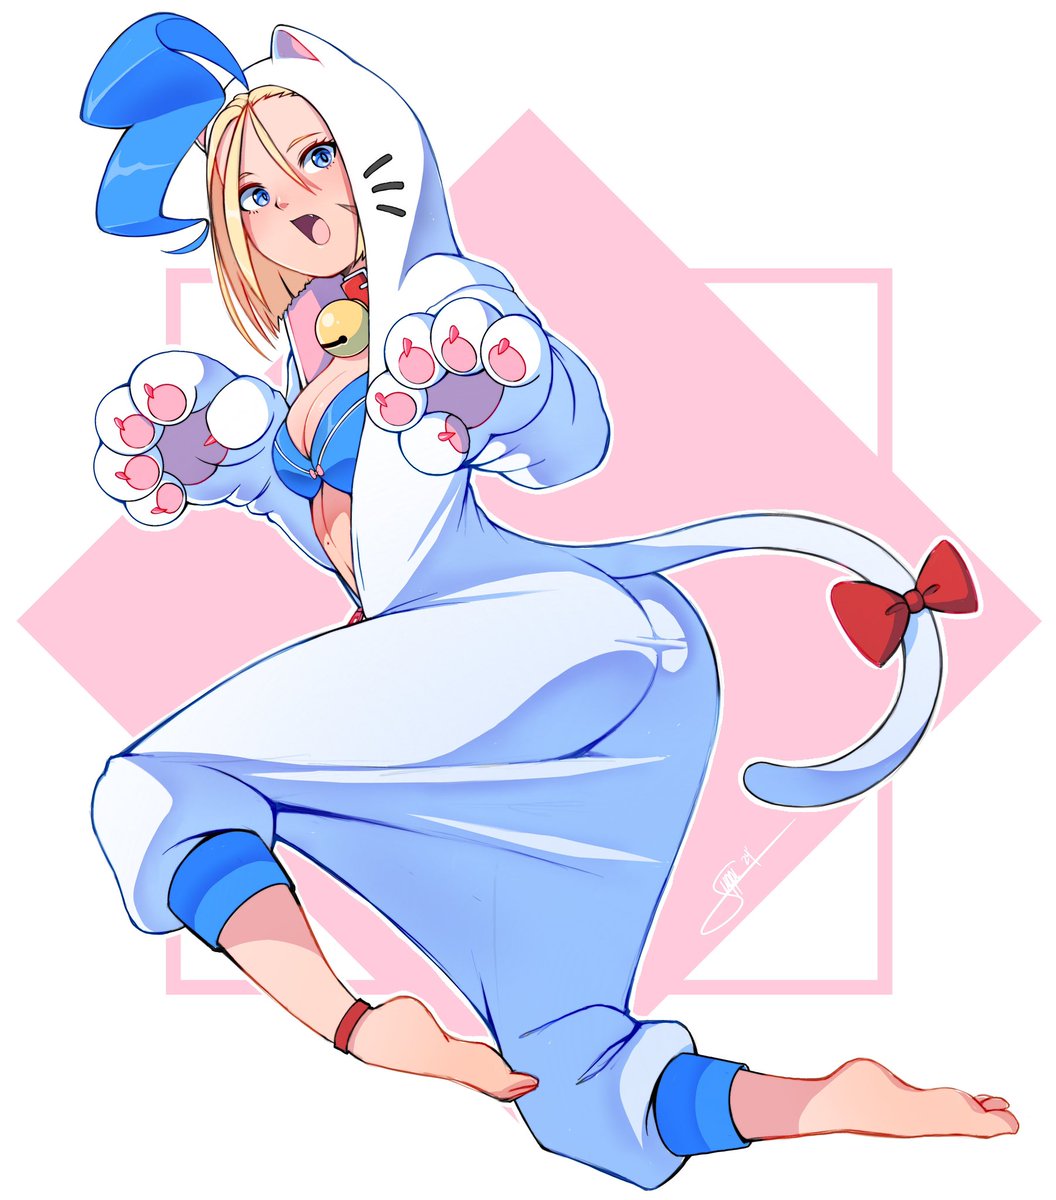 Can we get Felicia jammies for Cammy please?